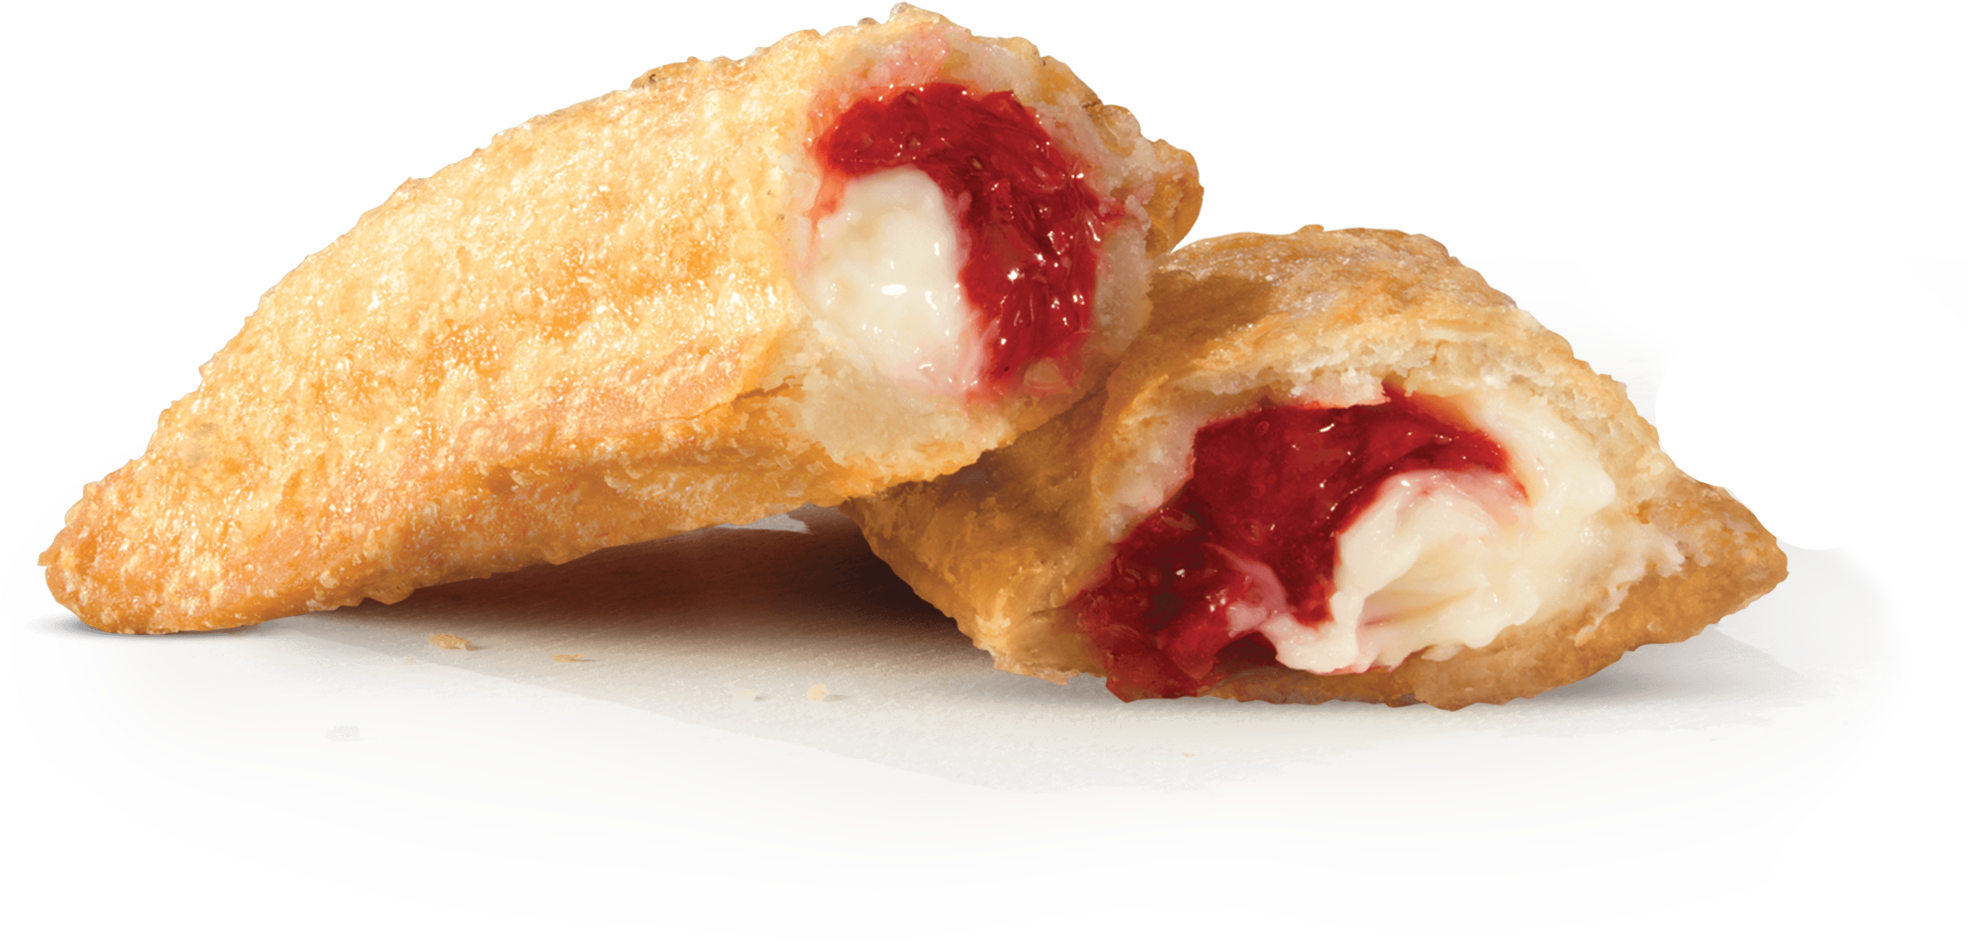 Arby's Strawberries & Cream Fried Pie Nutrition Facts